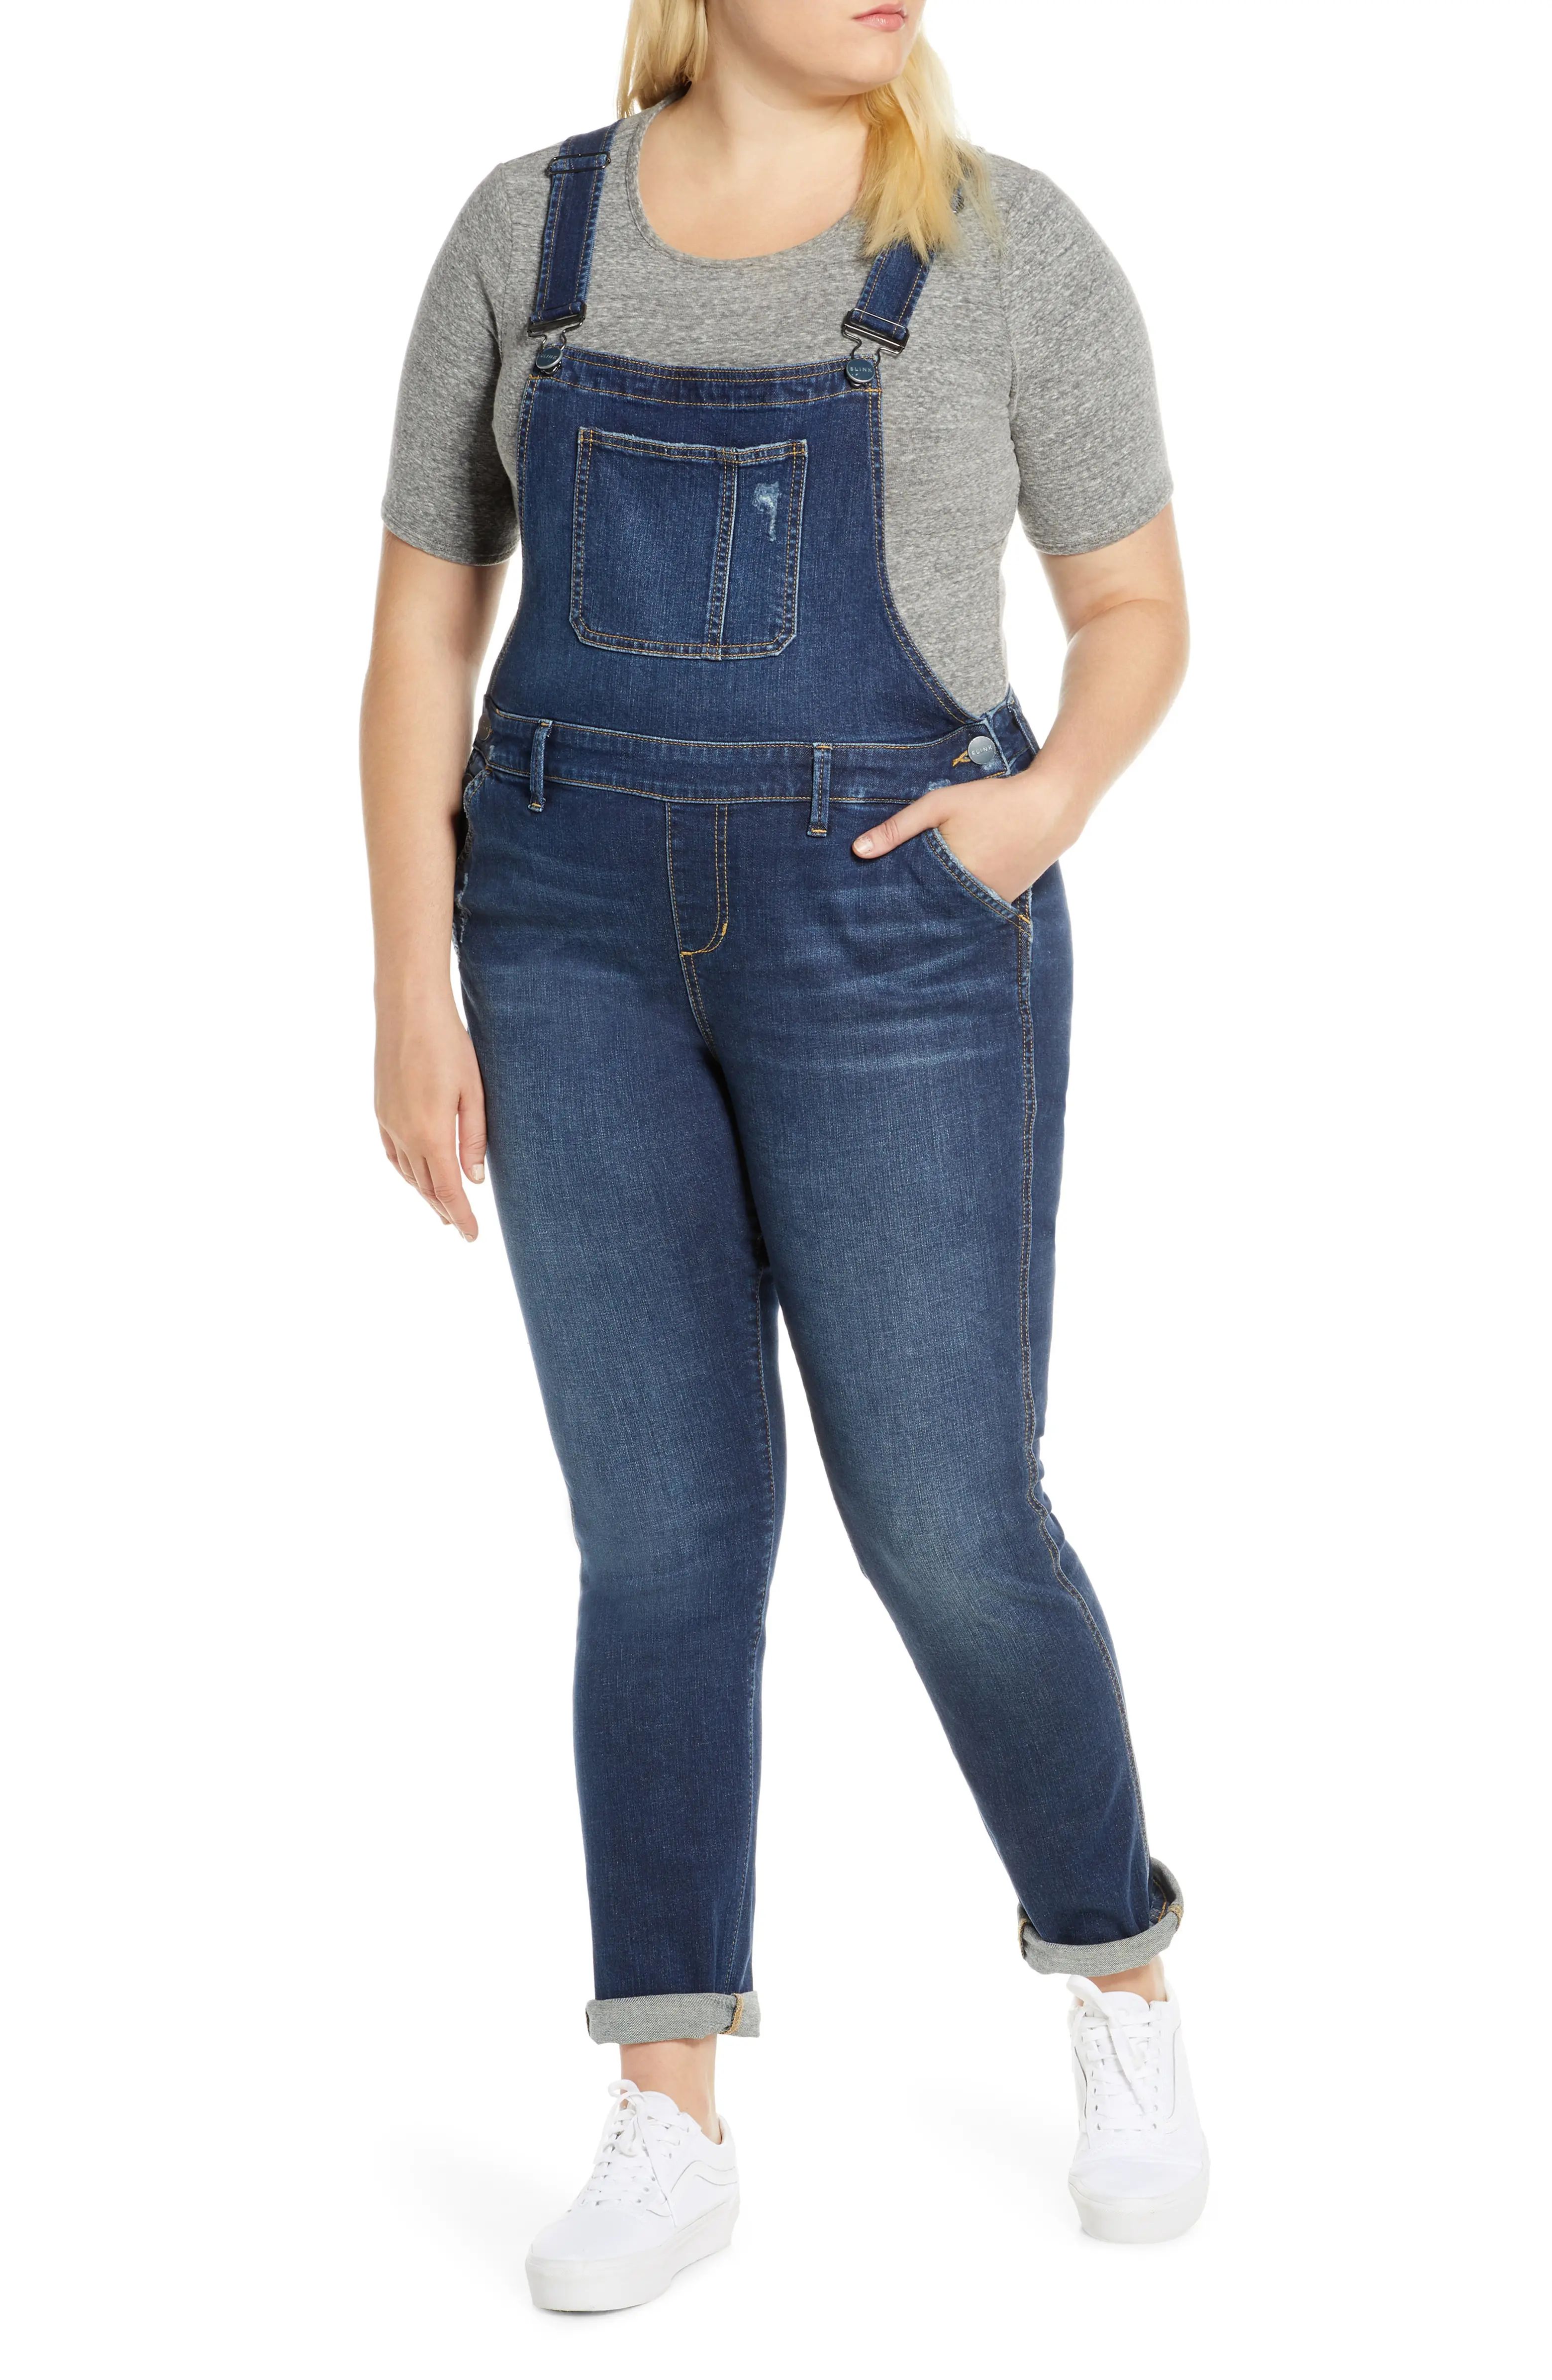 The Overalls | Nordstrom